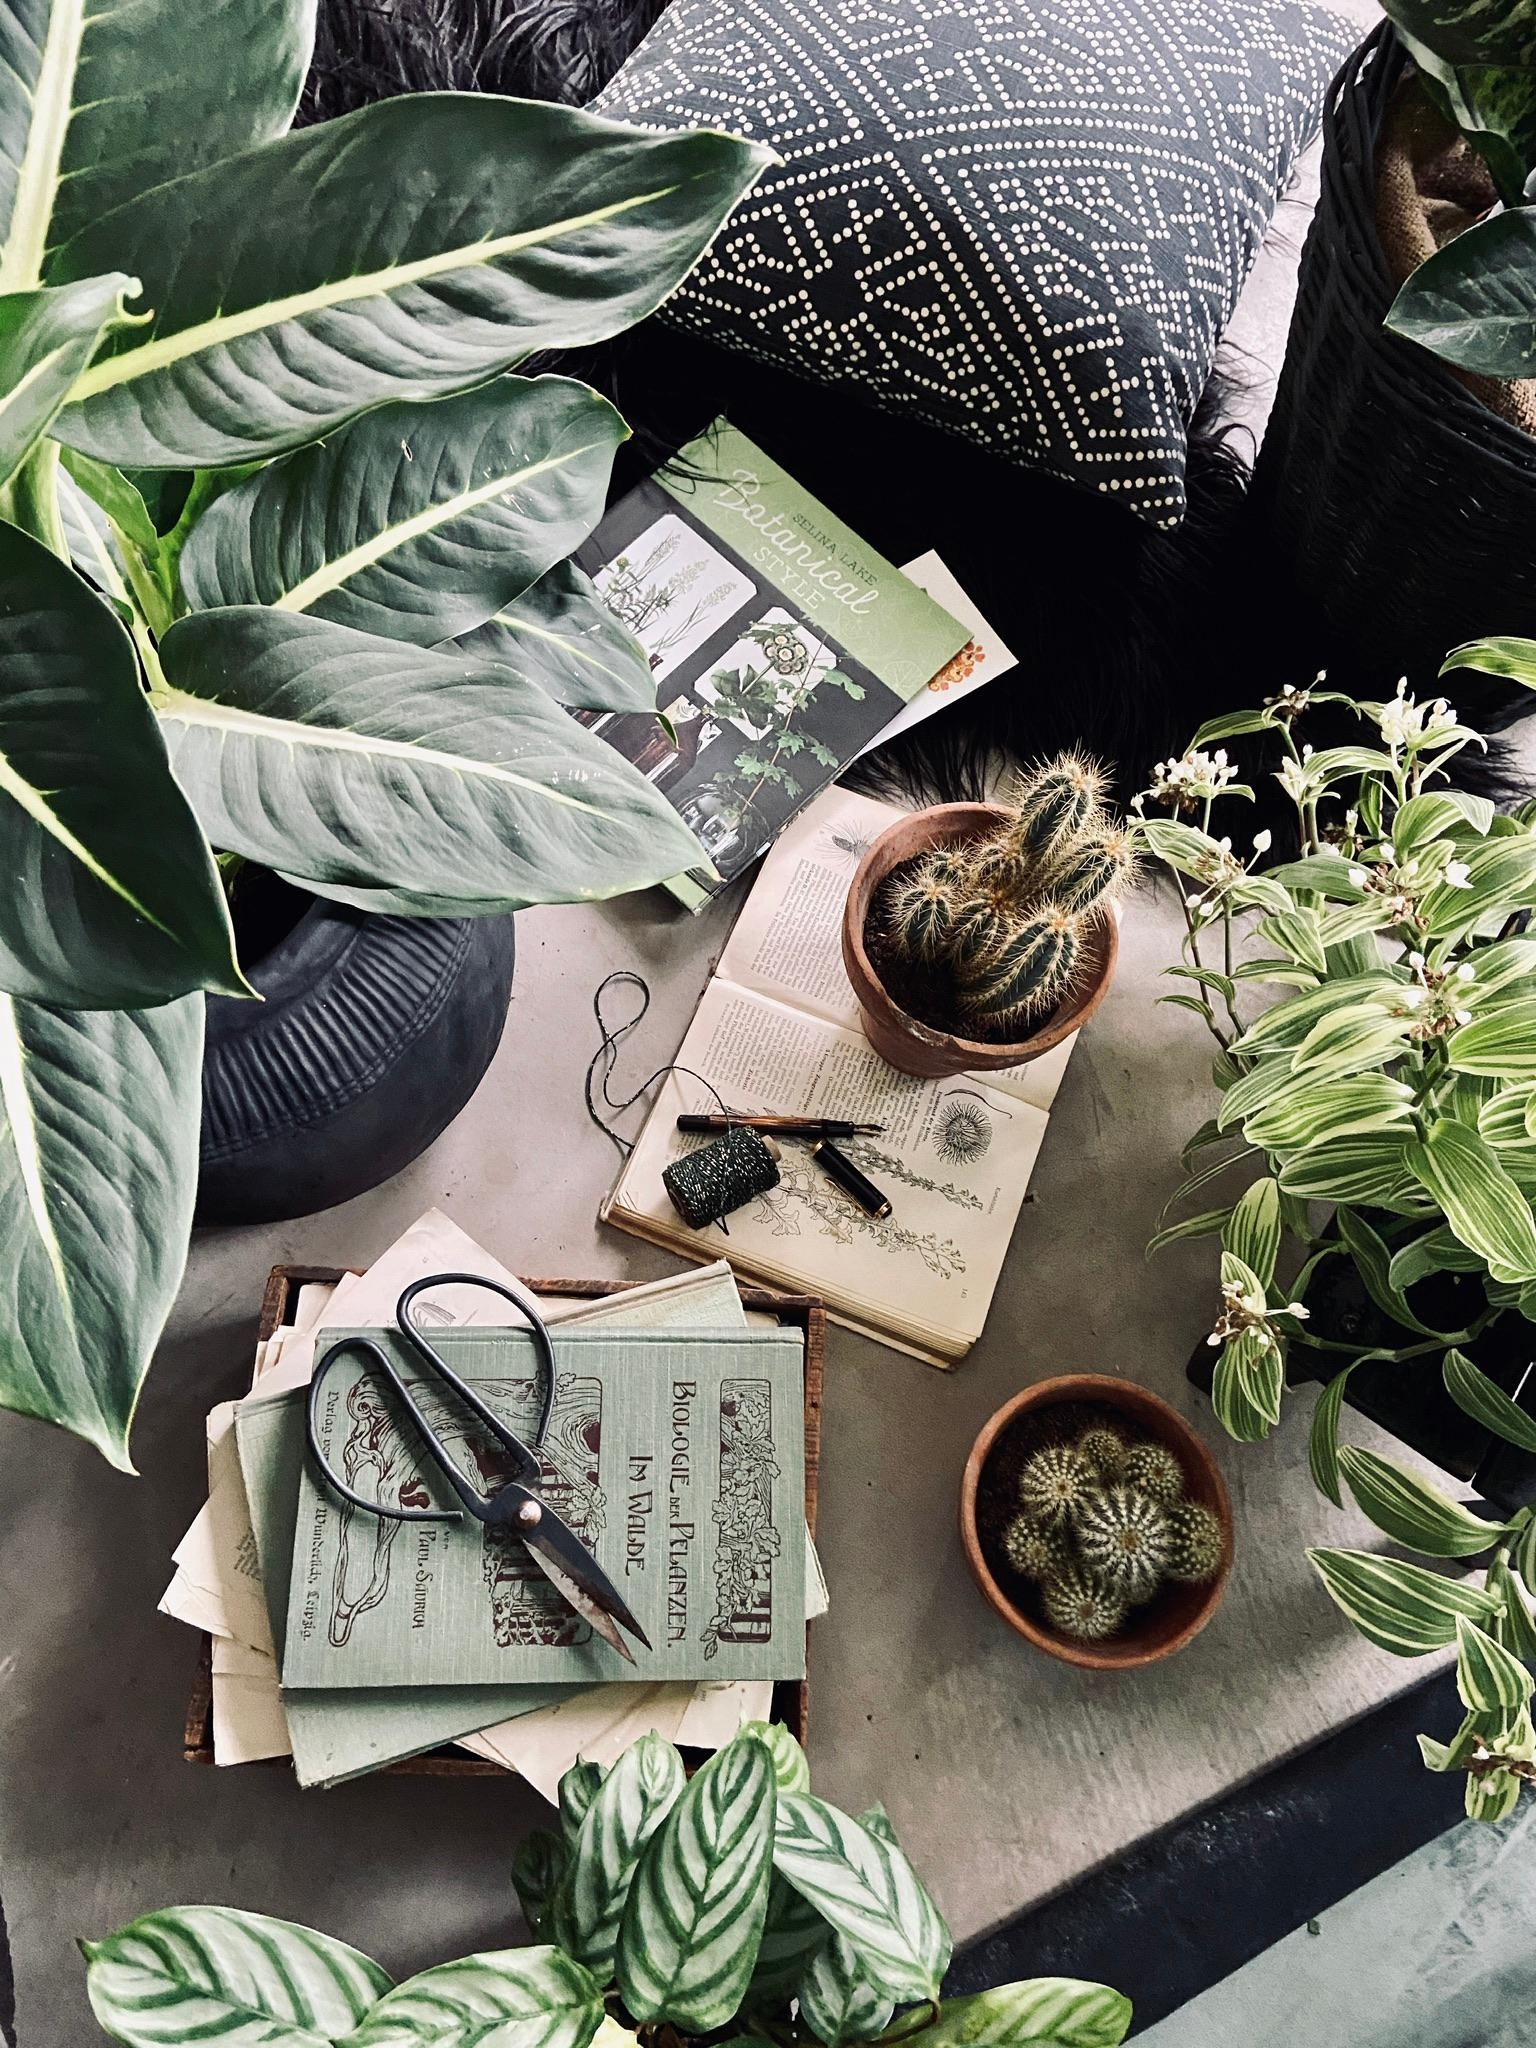 Vintageliebe & Botanical Style 
#pflanzenliebe #greenliving #simpleliving